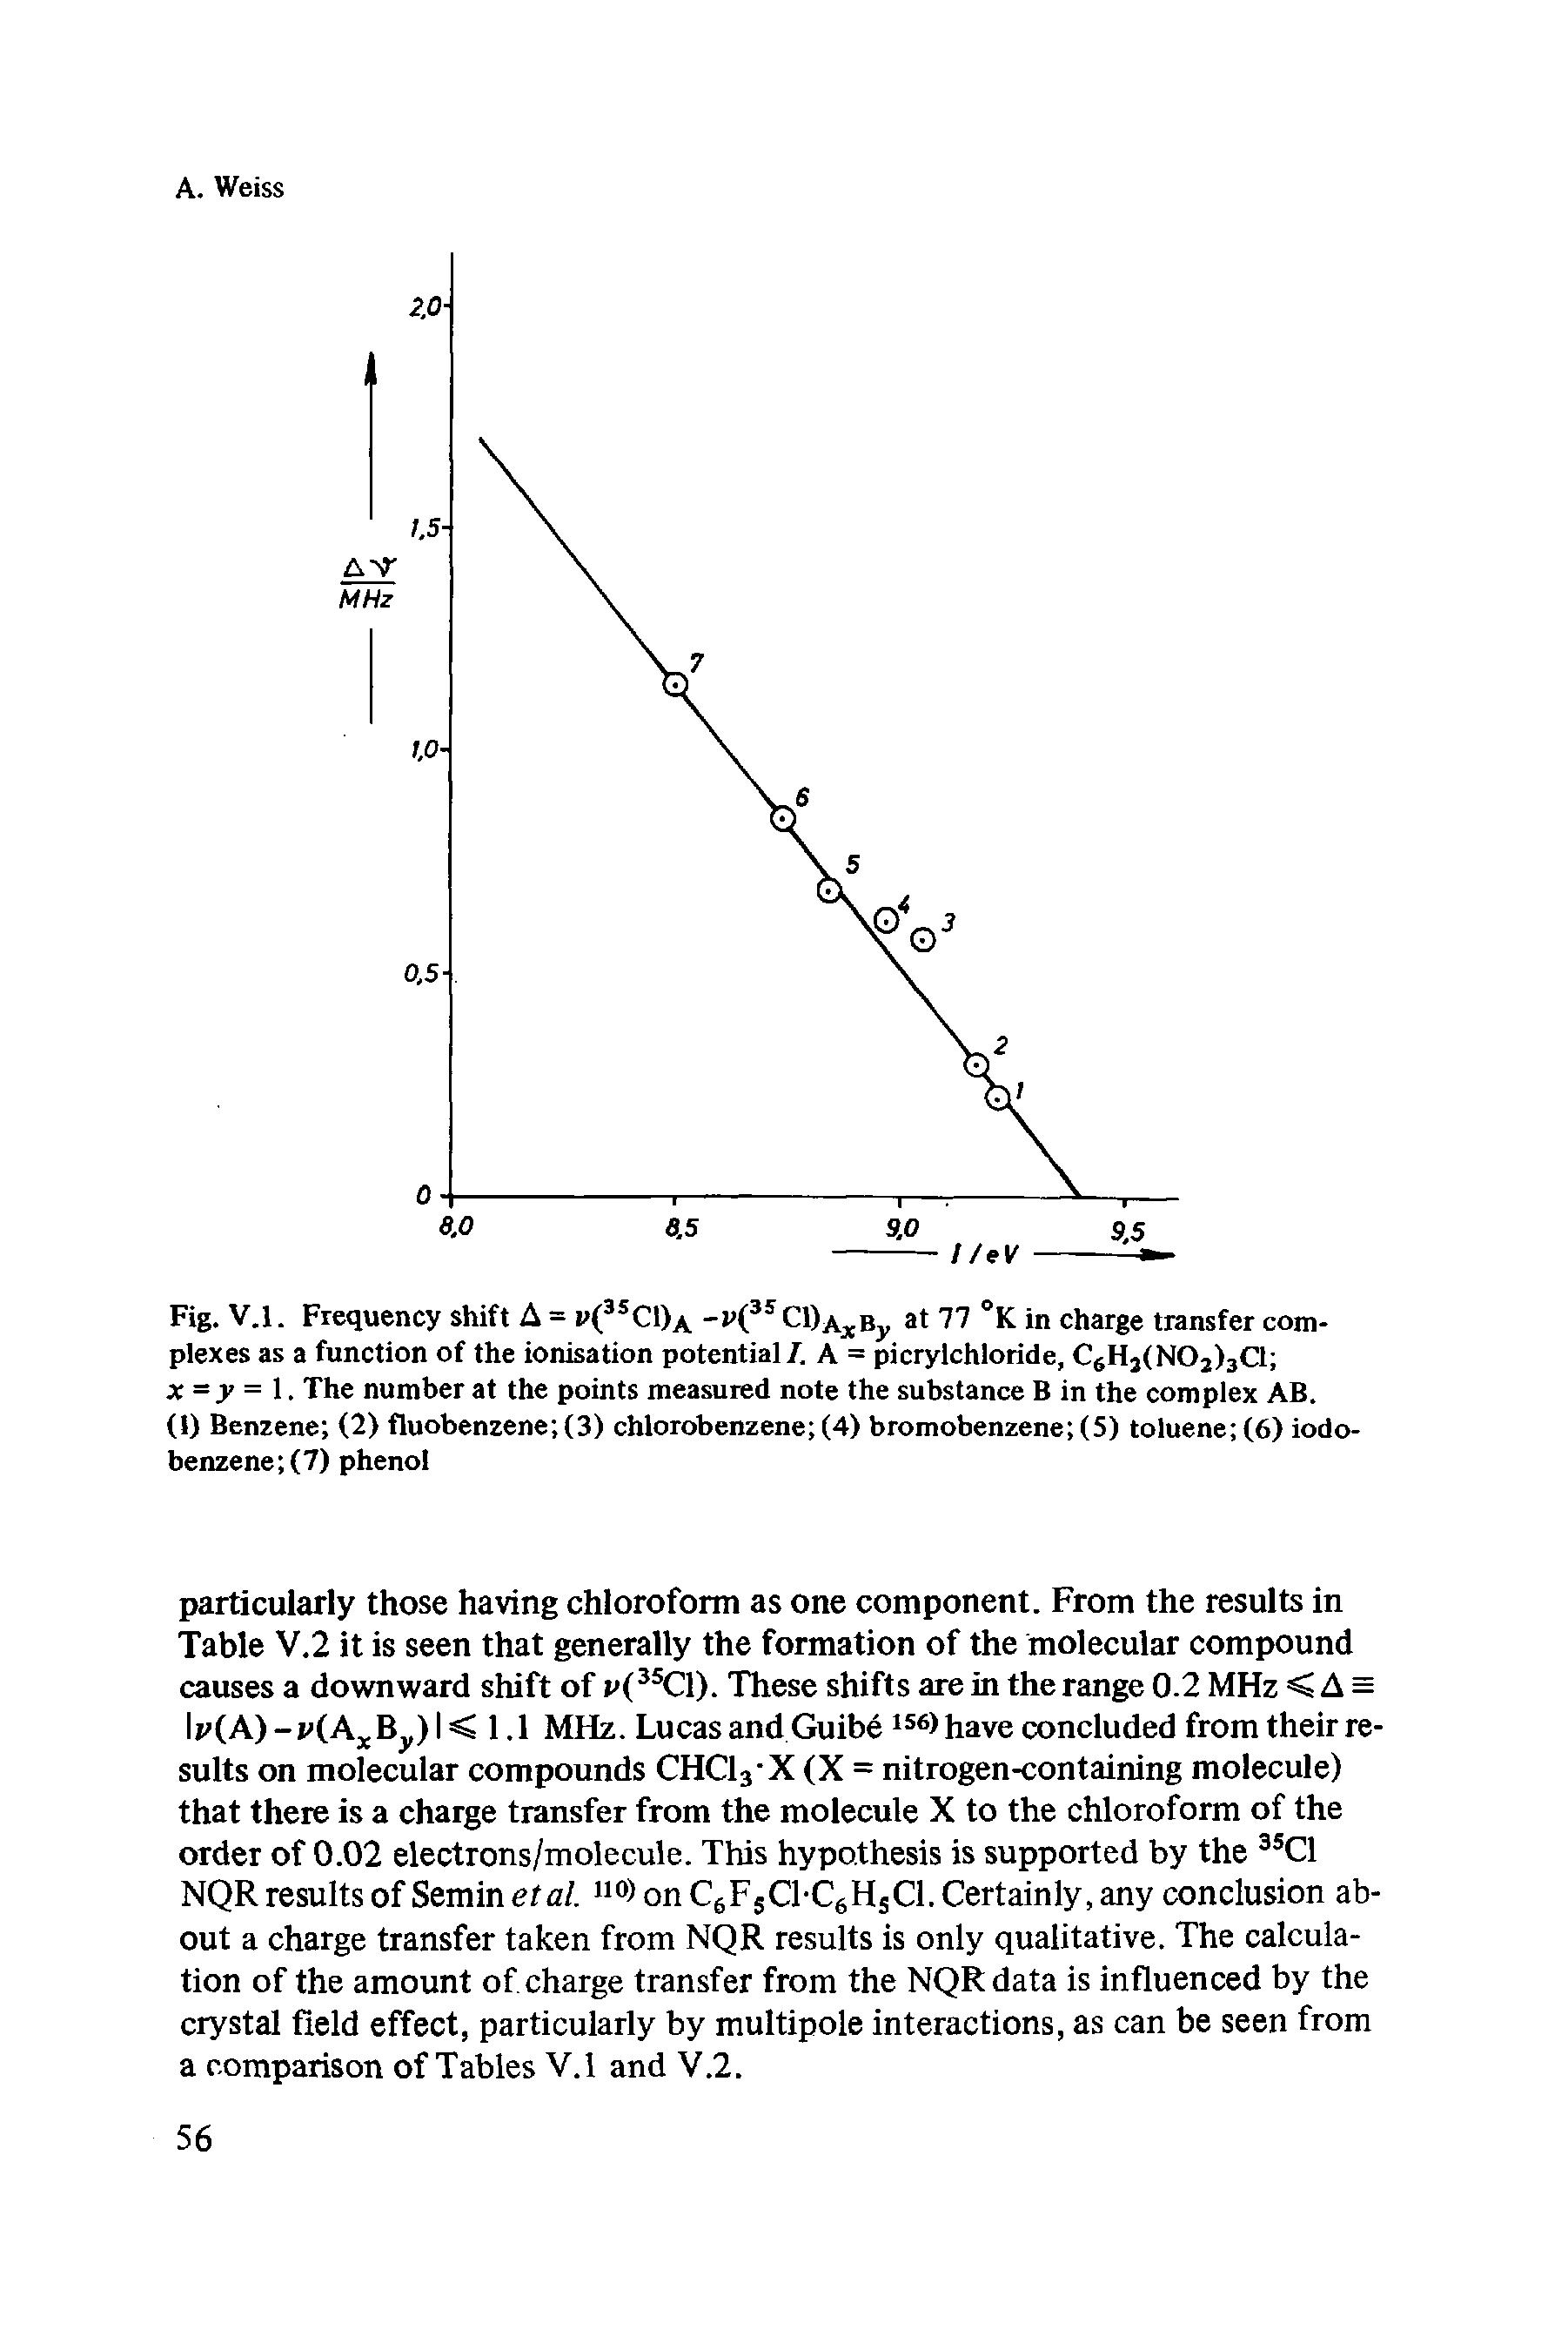 Fig. V.l. Frequency shift A = i>(35CI)a -v(3S Cl)AjcBy at 77 °K in charge transfer complexes as a function of the ionisation potential/. A = picrylchloride, C6H3(N02)3C1 x = y = 1. The number at the points measured note the substance B in the complex AB.